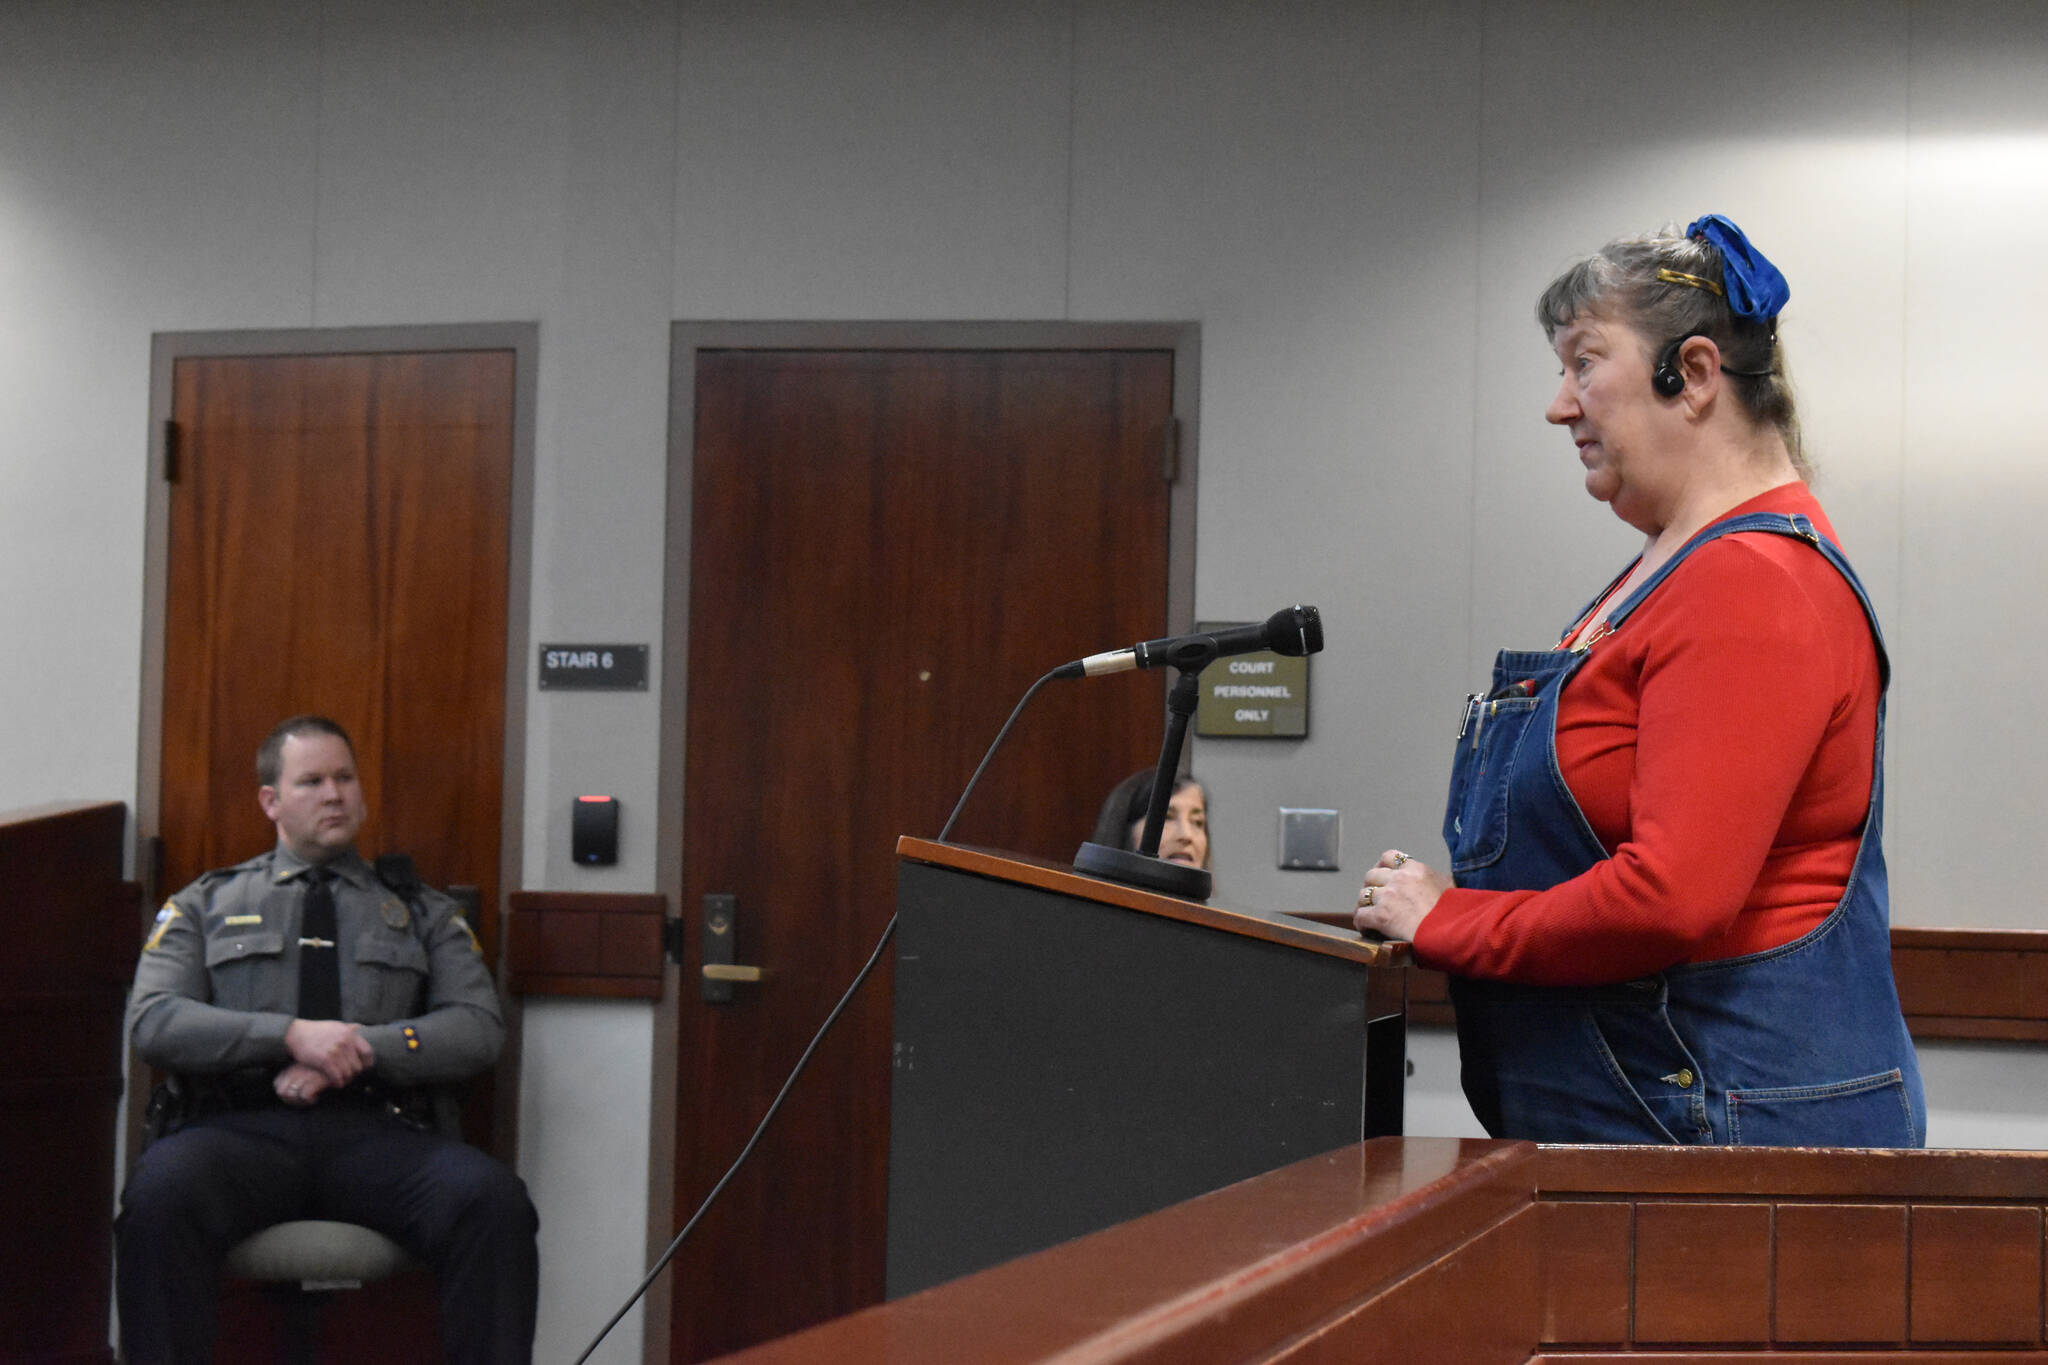 Wenda Kennedy speaks during the public hearing held as part of the selection process for a new Kenai Superior Court Judge on Monday, Jan. 23, 2023, at the Kenai Courthouse in Kenai, Alaska. (Jake Dye/Peninsula Clarion)